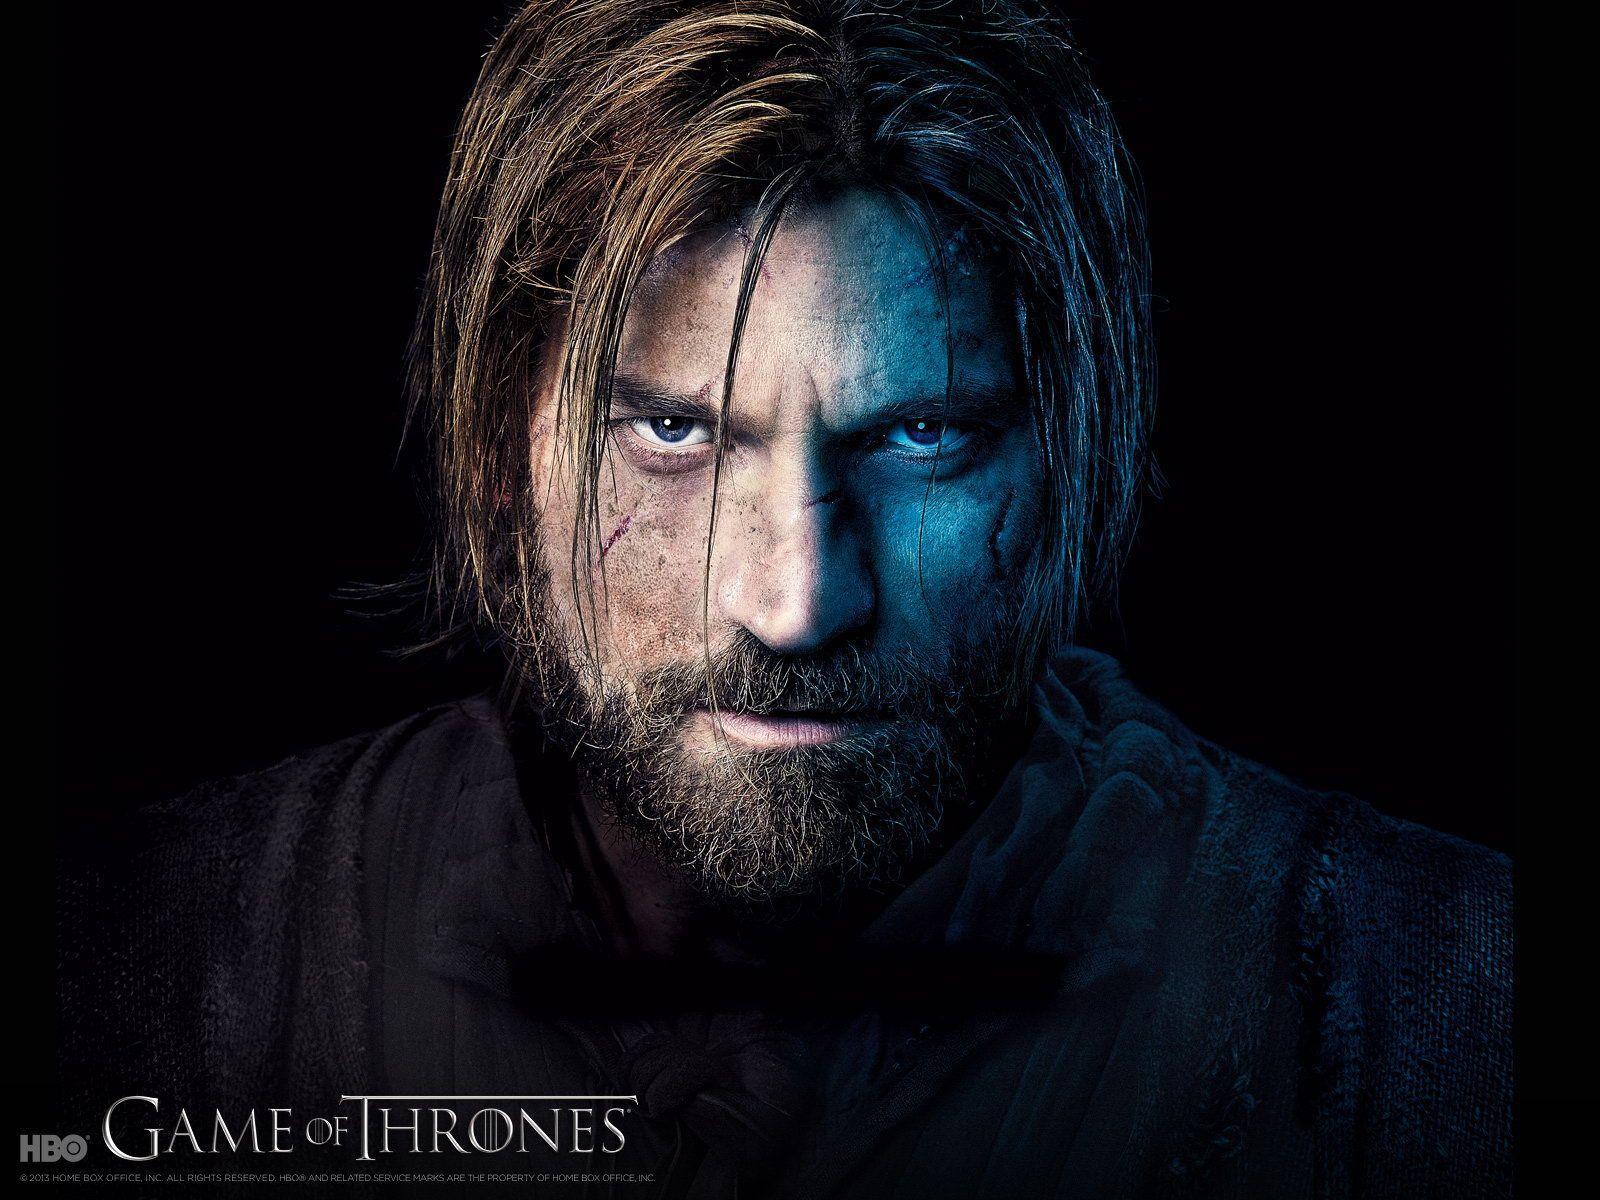 Gallery For > Game Of Thrones Hbo Wallpaper